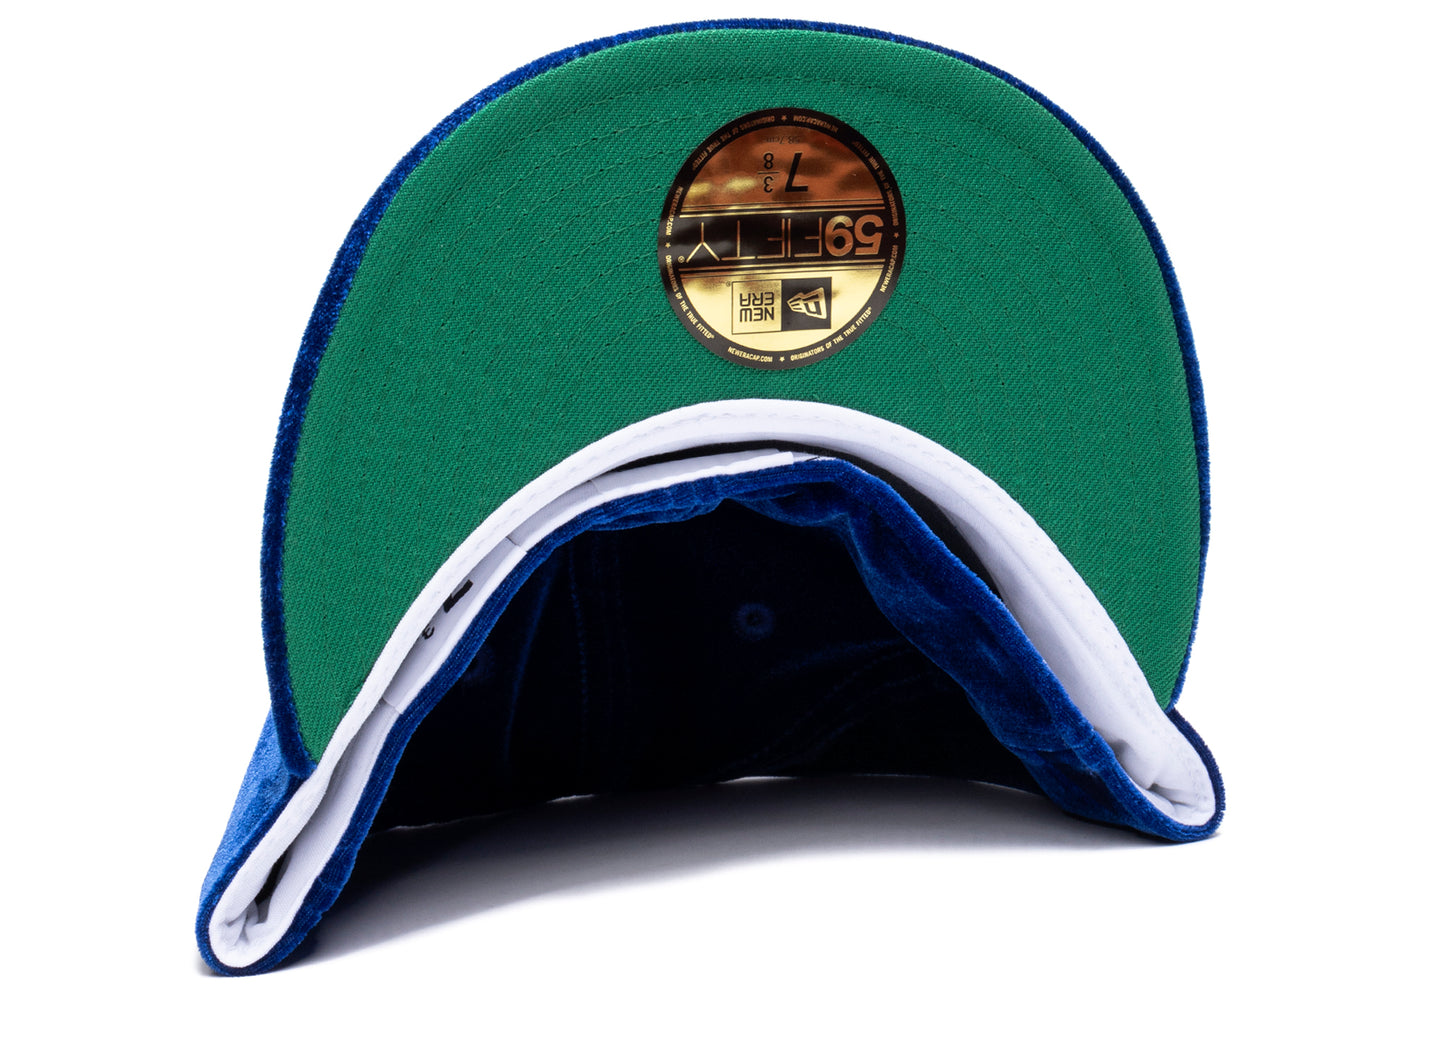 New Era 59FIFTY Kentucky Fitted Hat 'Royal' xld